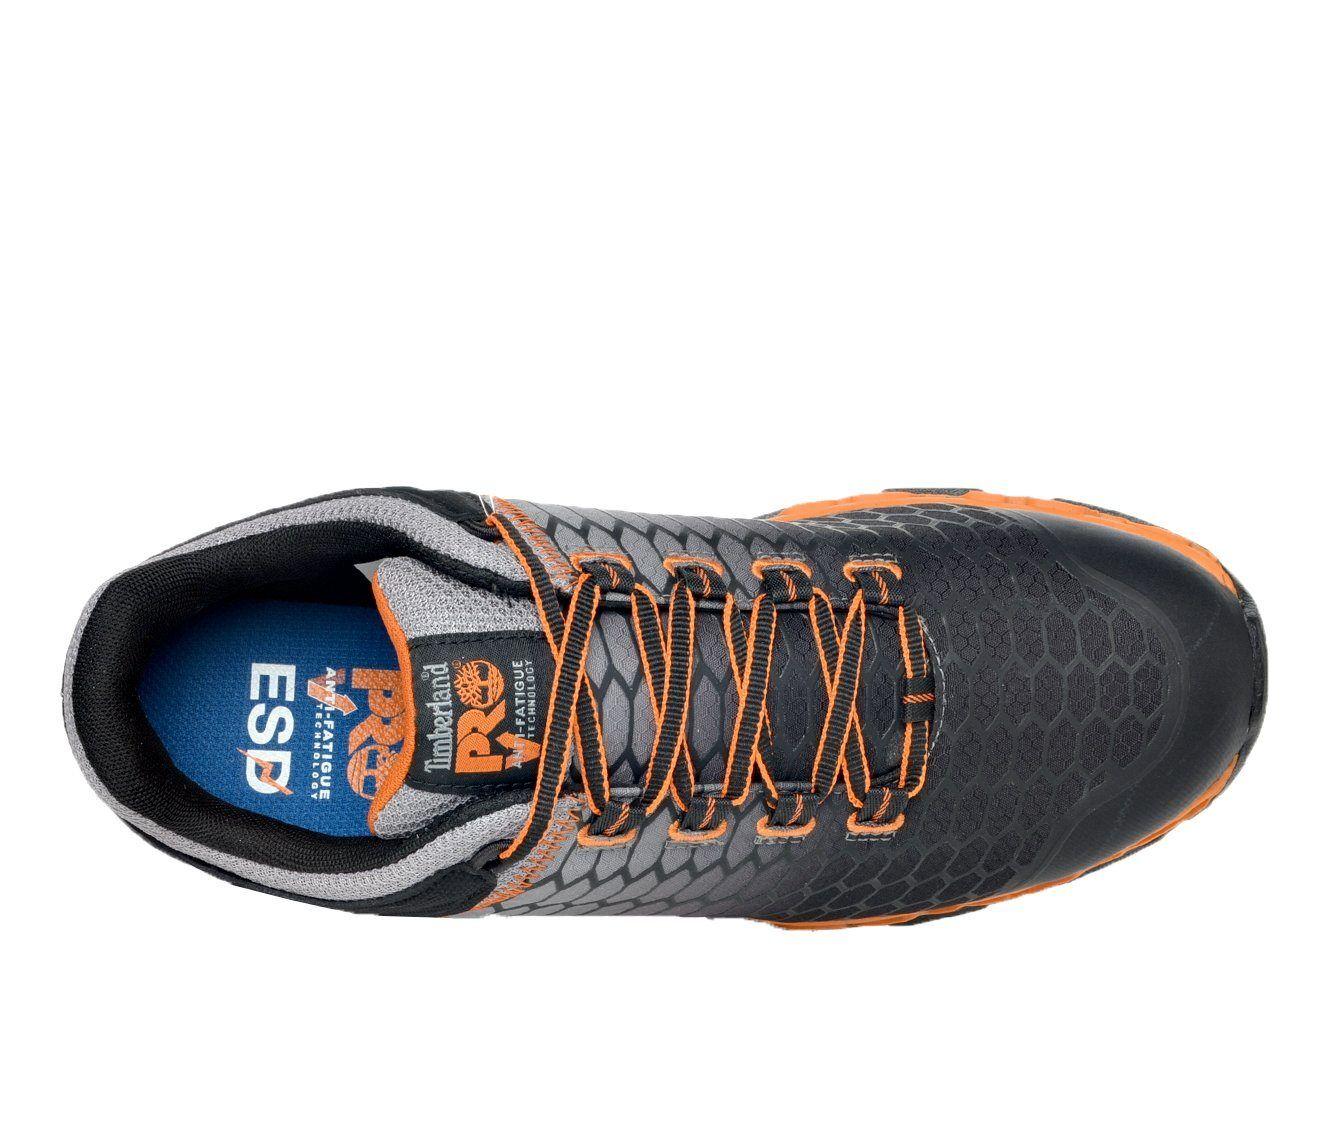 Timberland Synthetic Powertrain Sport A1gt9 Boot in Grey,Orange (Gray ...